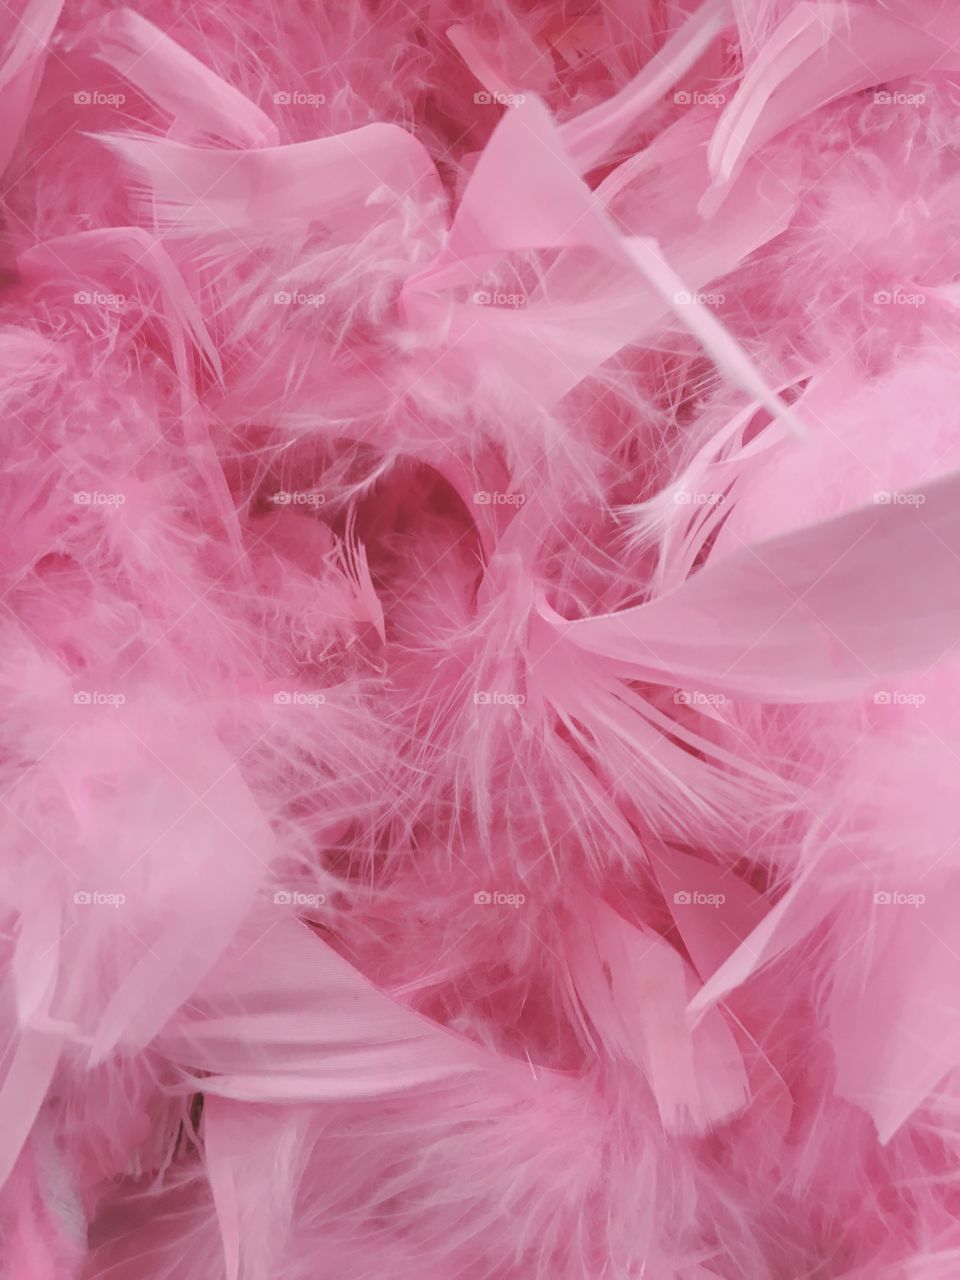 Full frame of pink feather